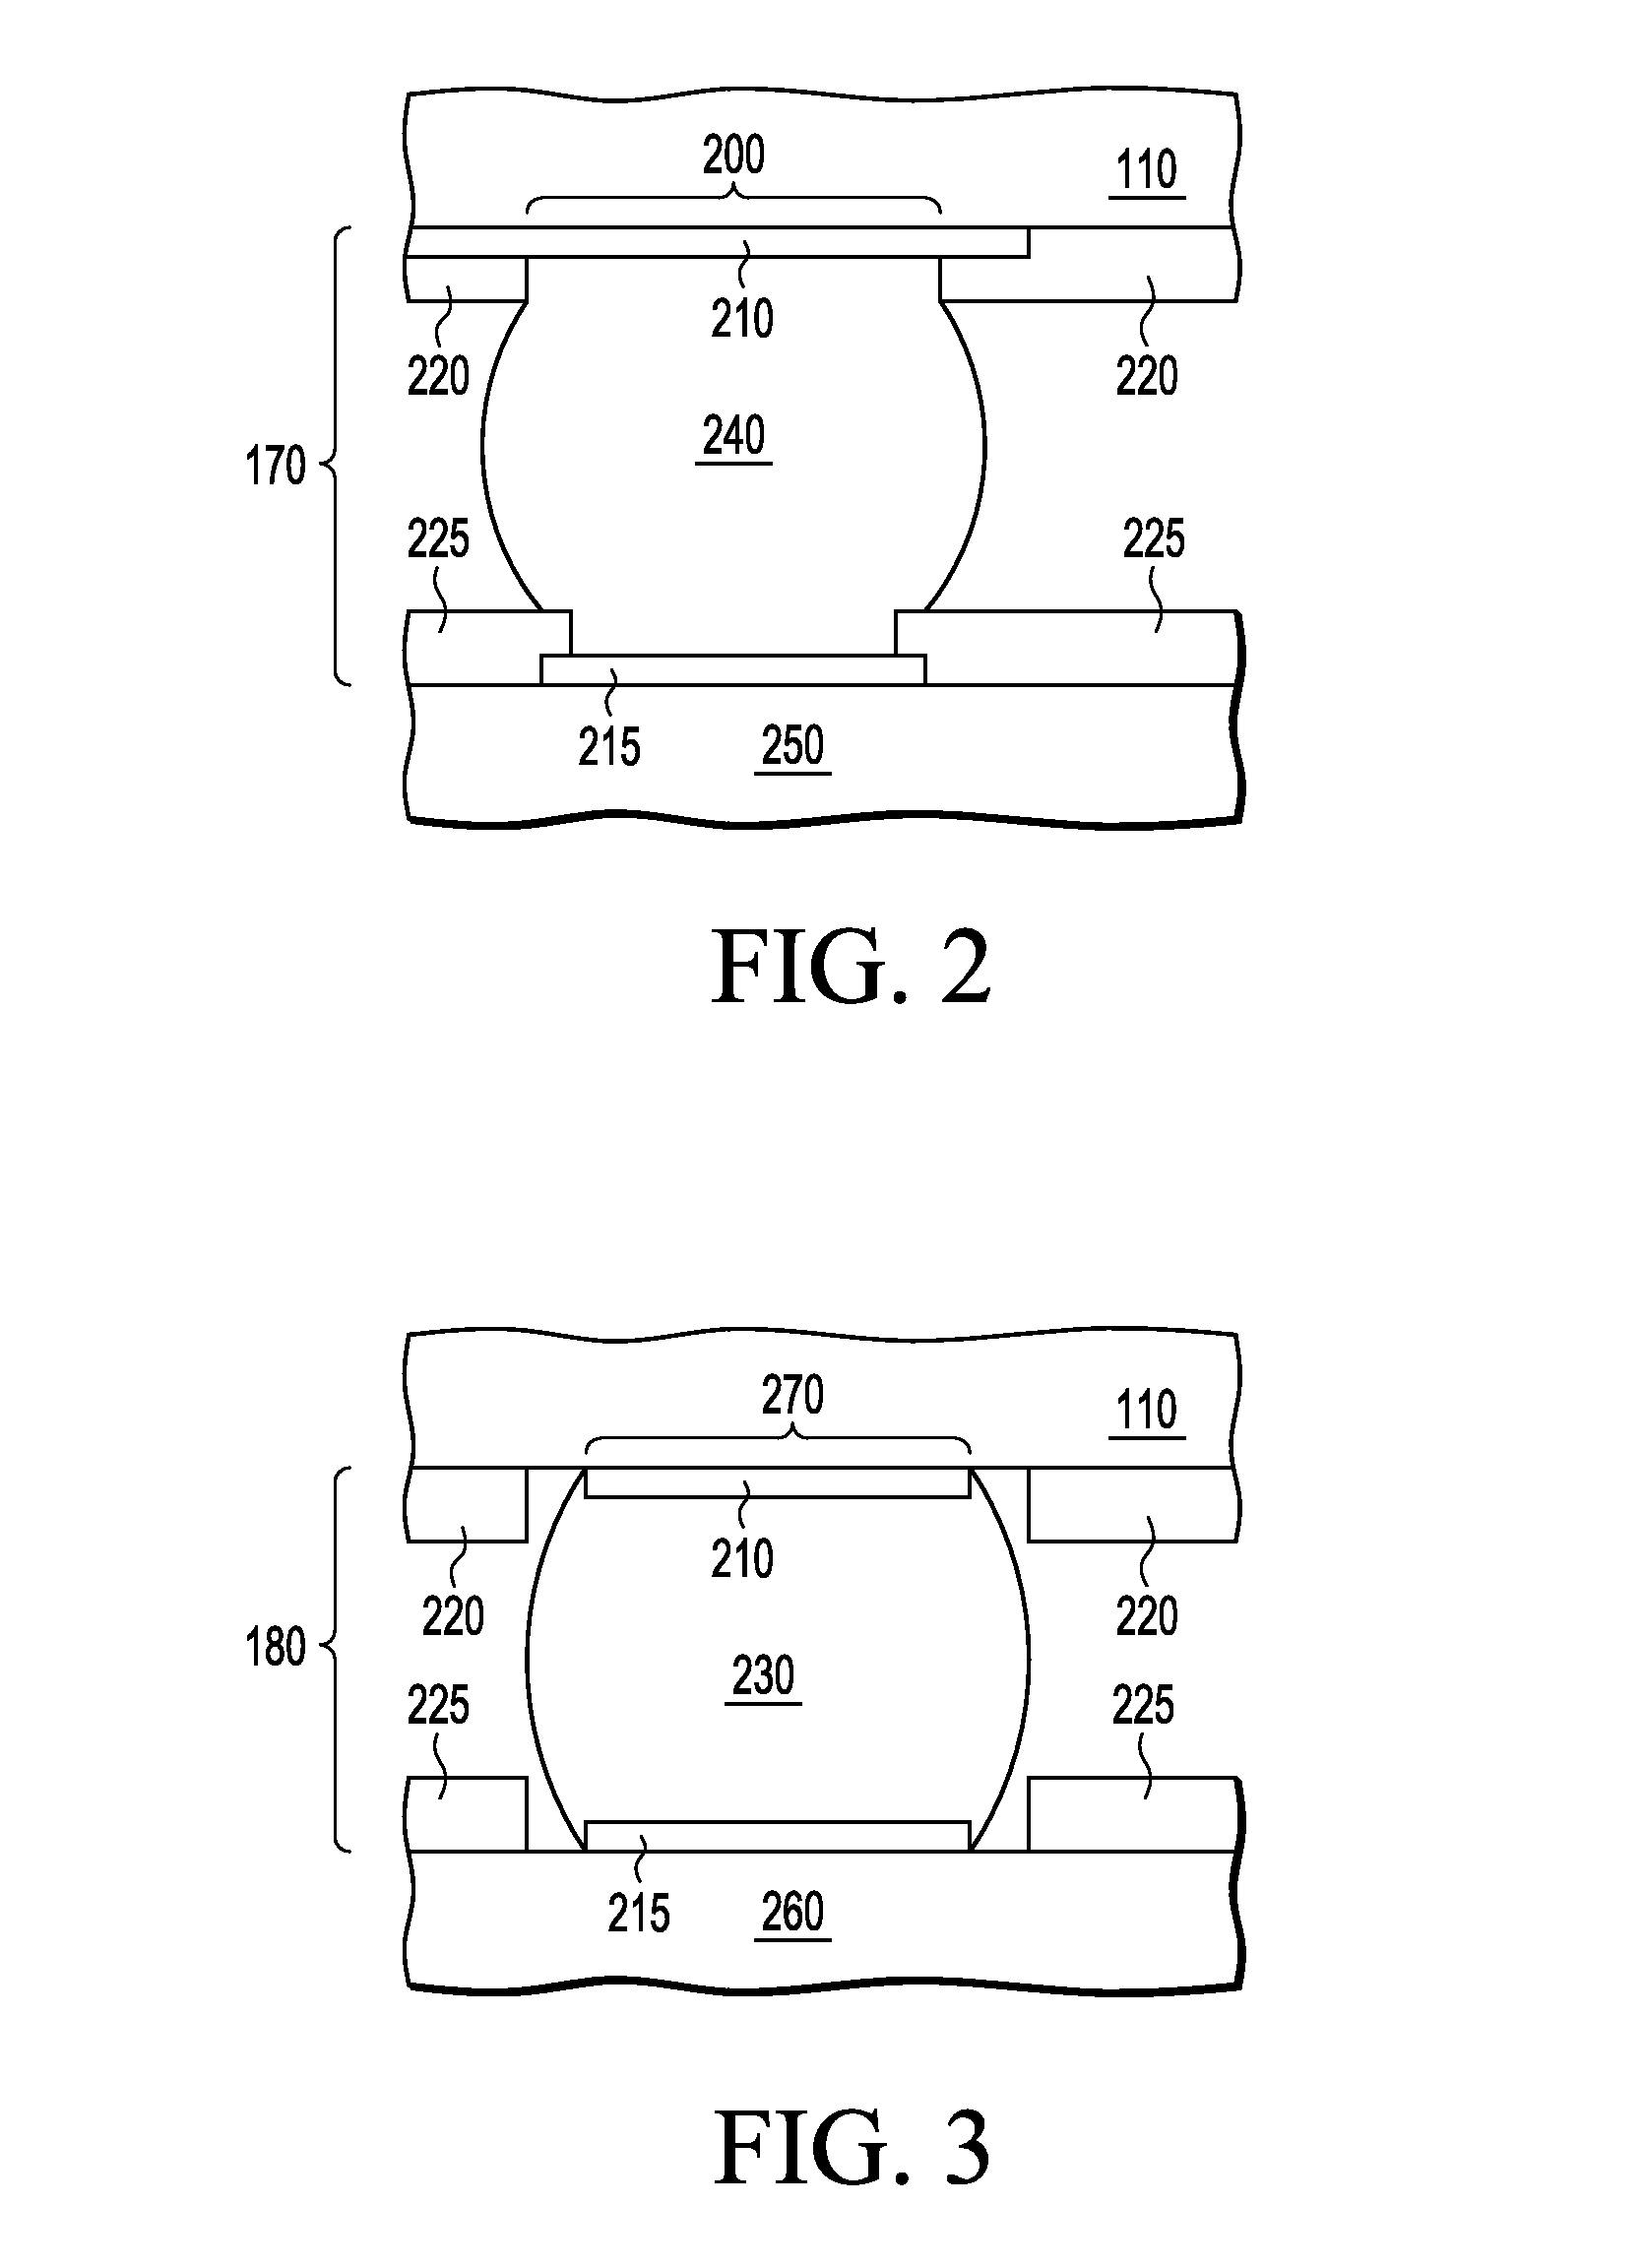 Package substrate with improved reliability